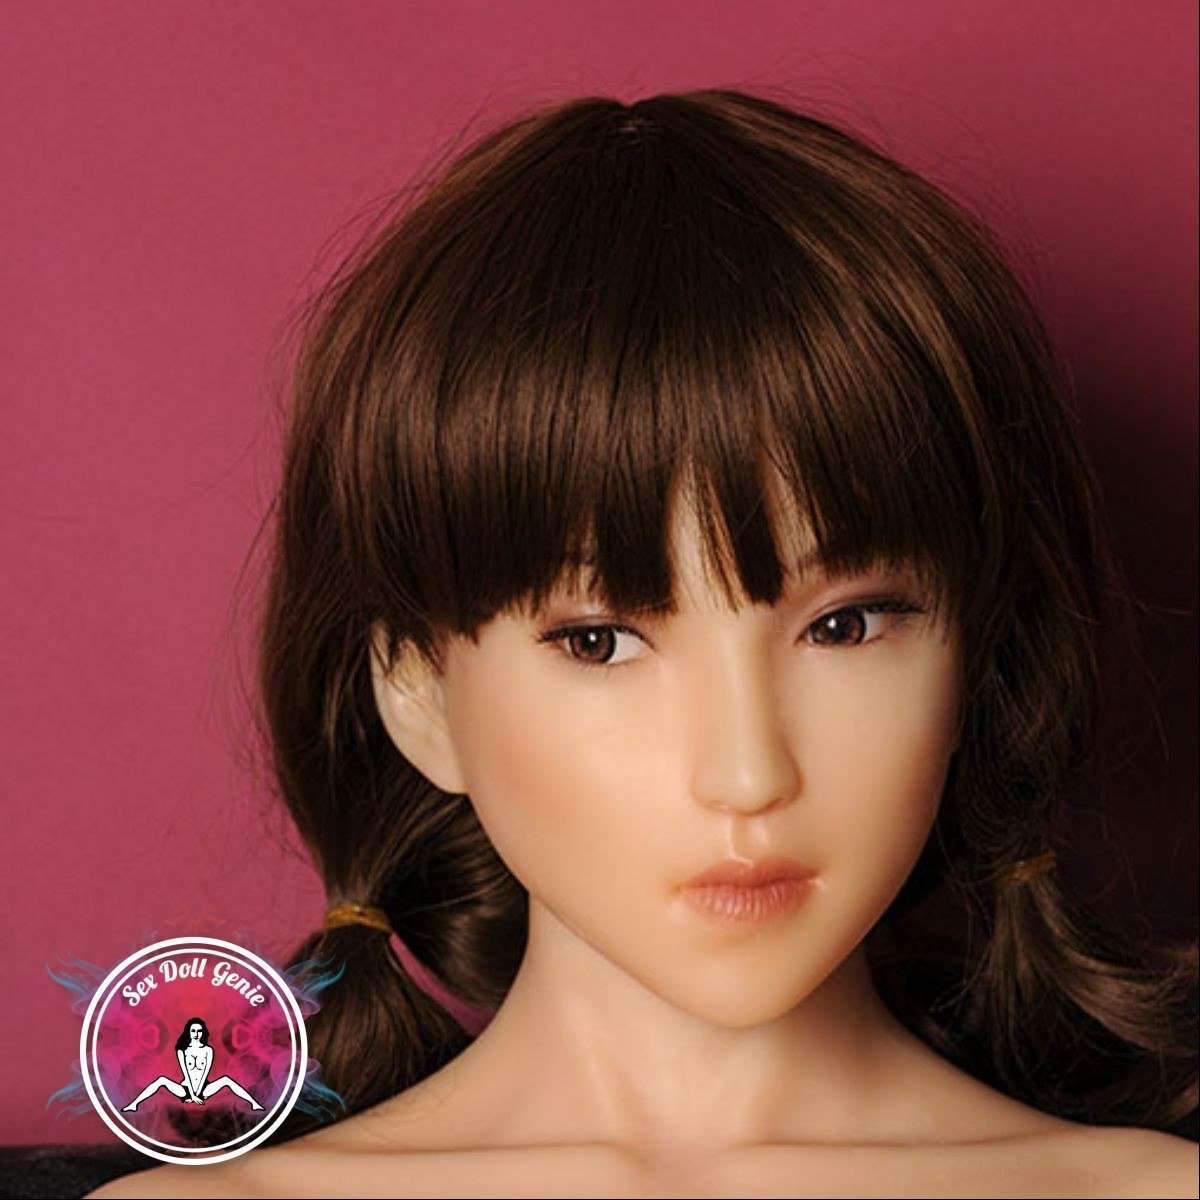 DS Doll - 163 - Emily Head - Type 1 D Cup Silicone Doll-17